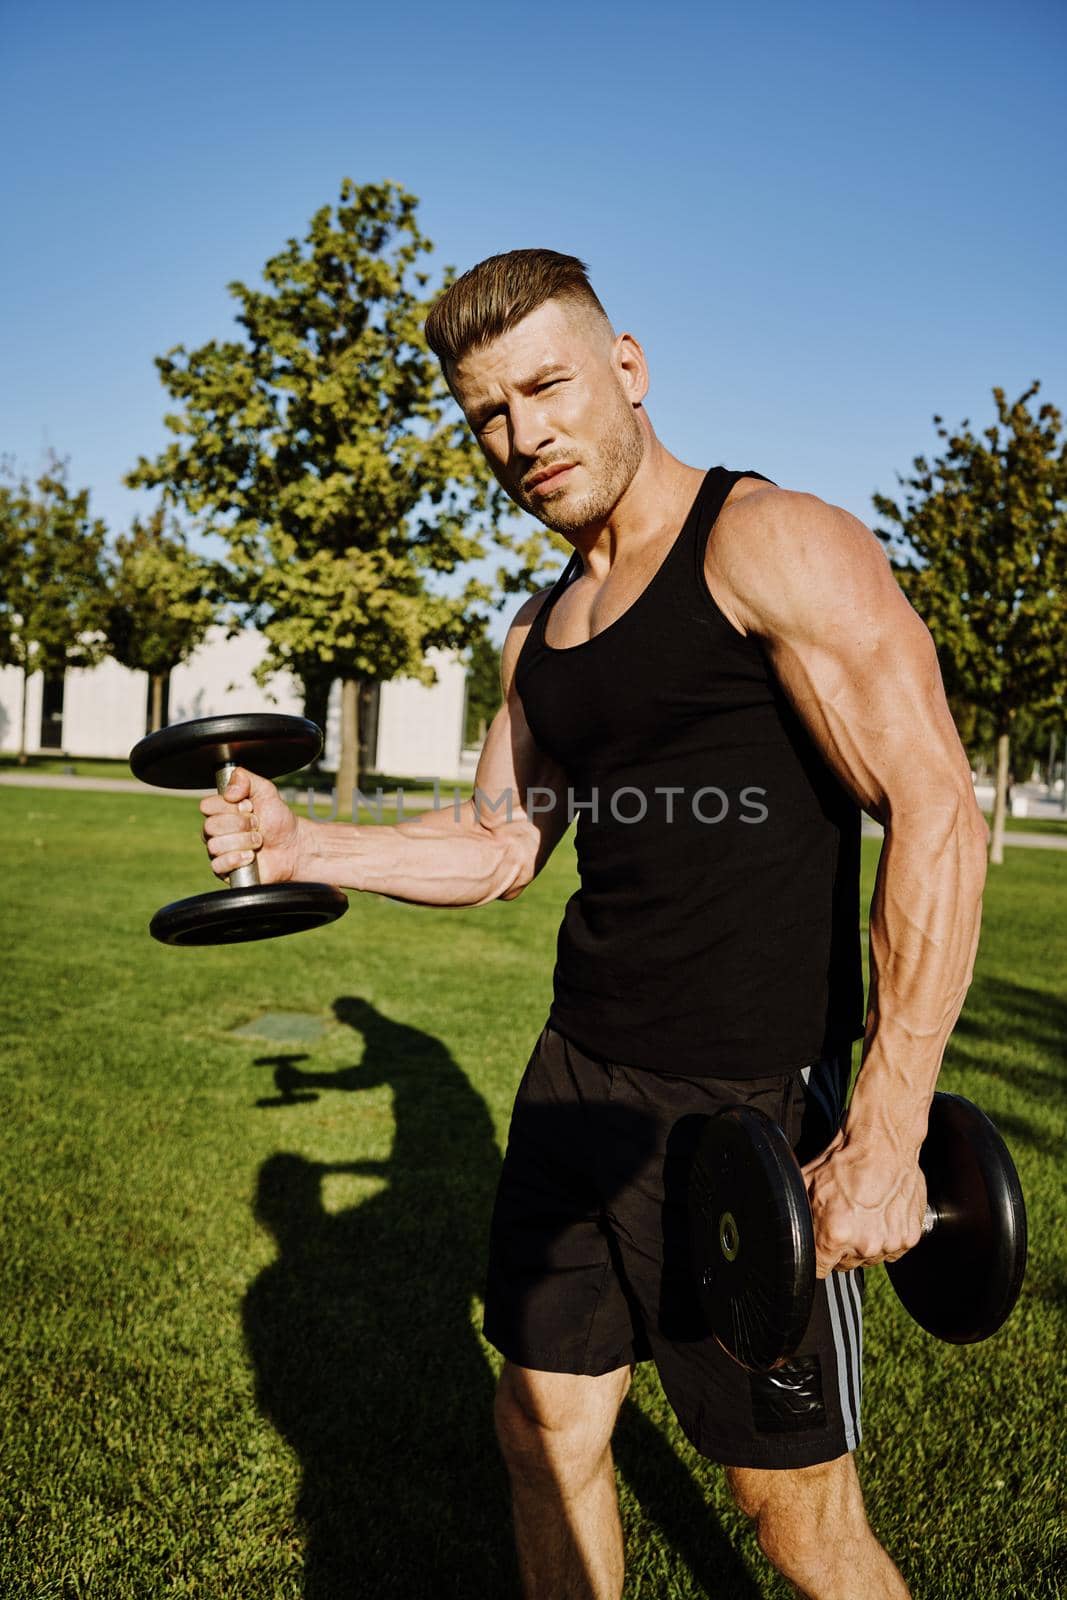 sports male park workout fitness exercise dumbbells. High quality photo